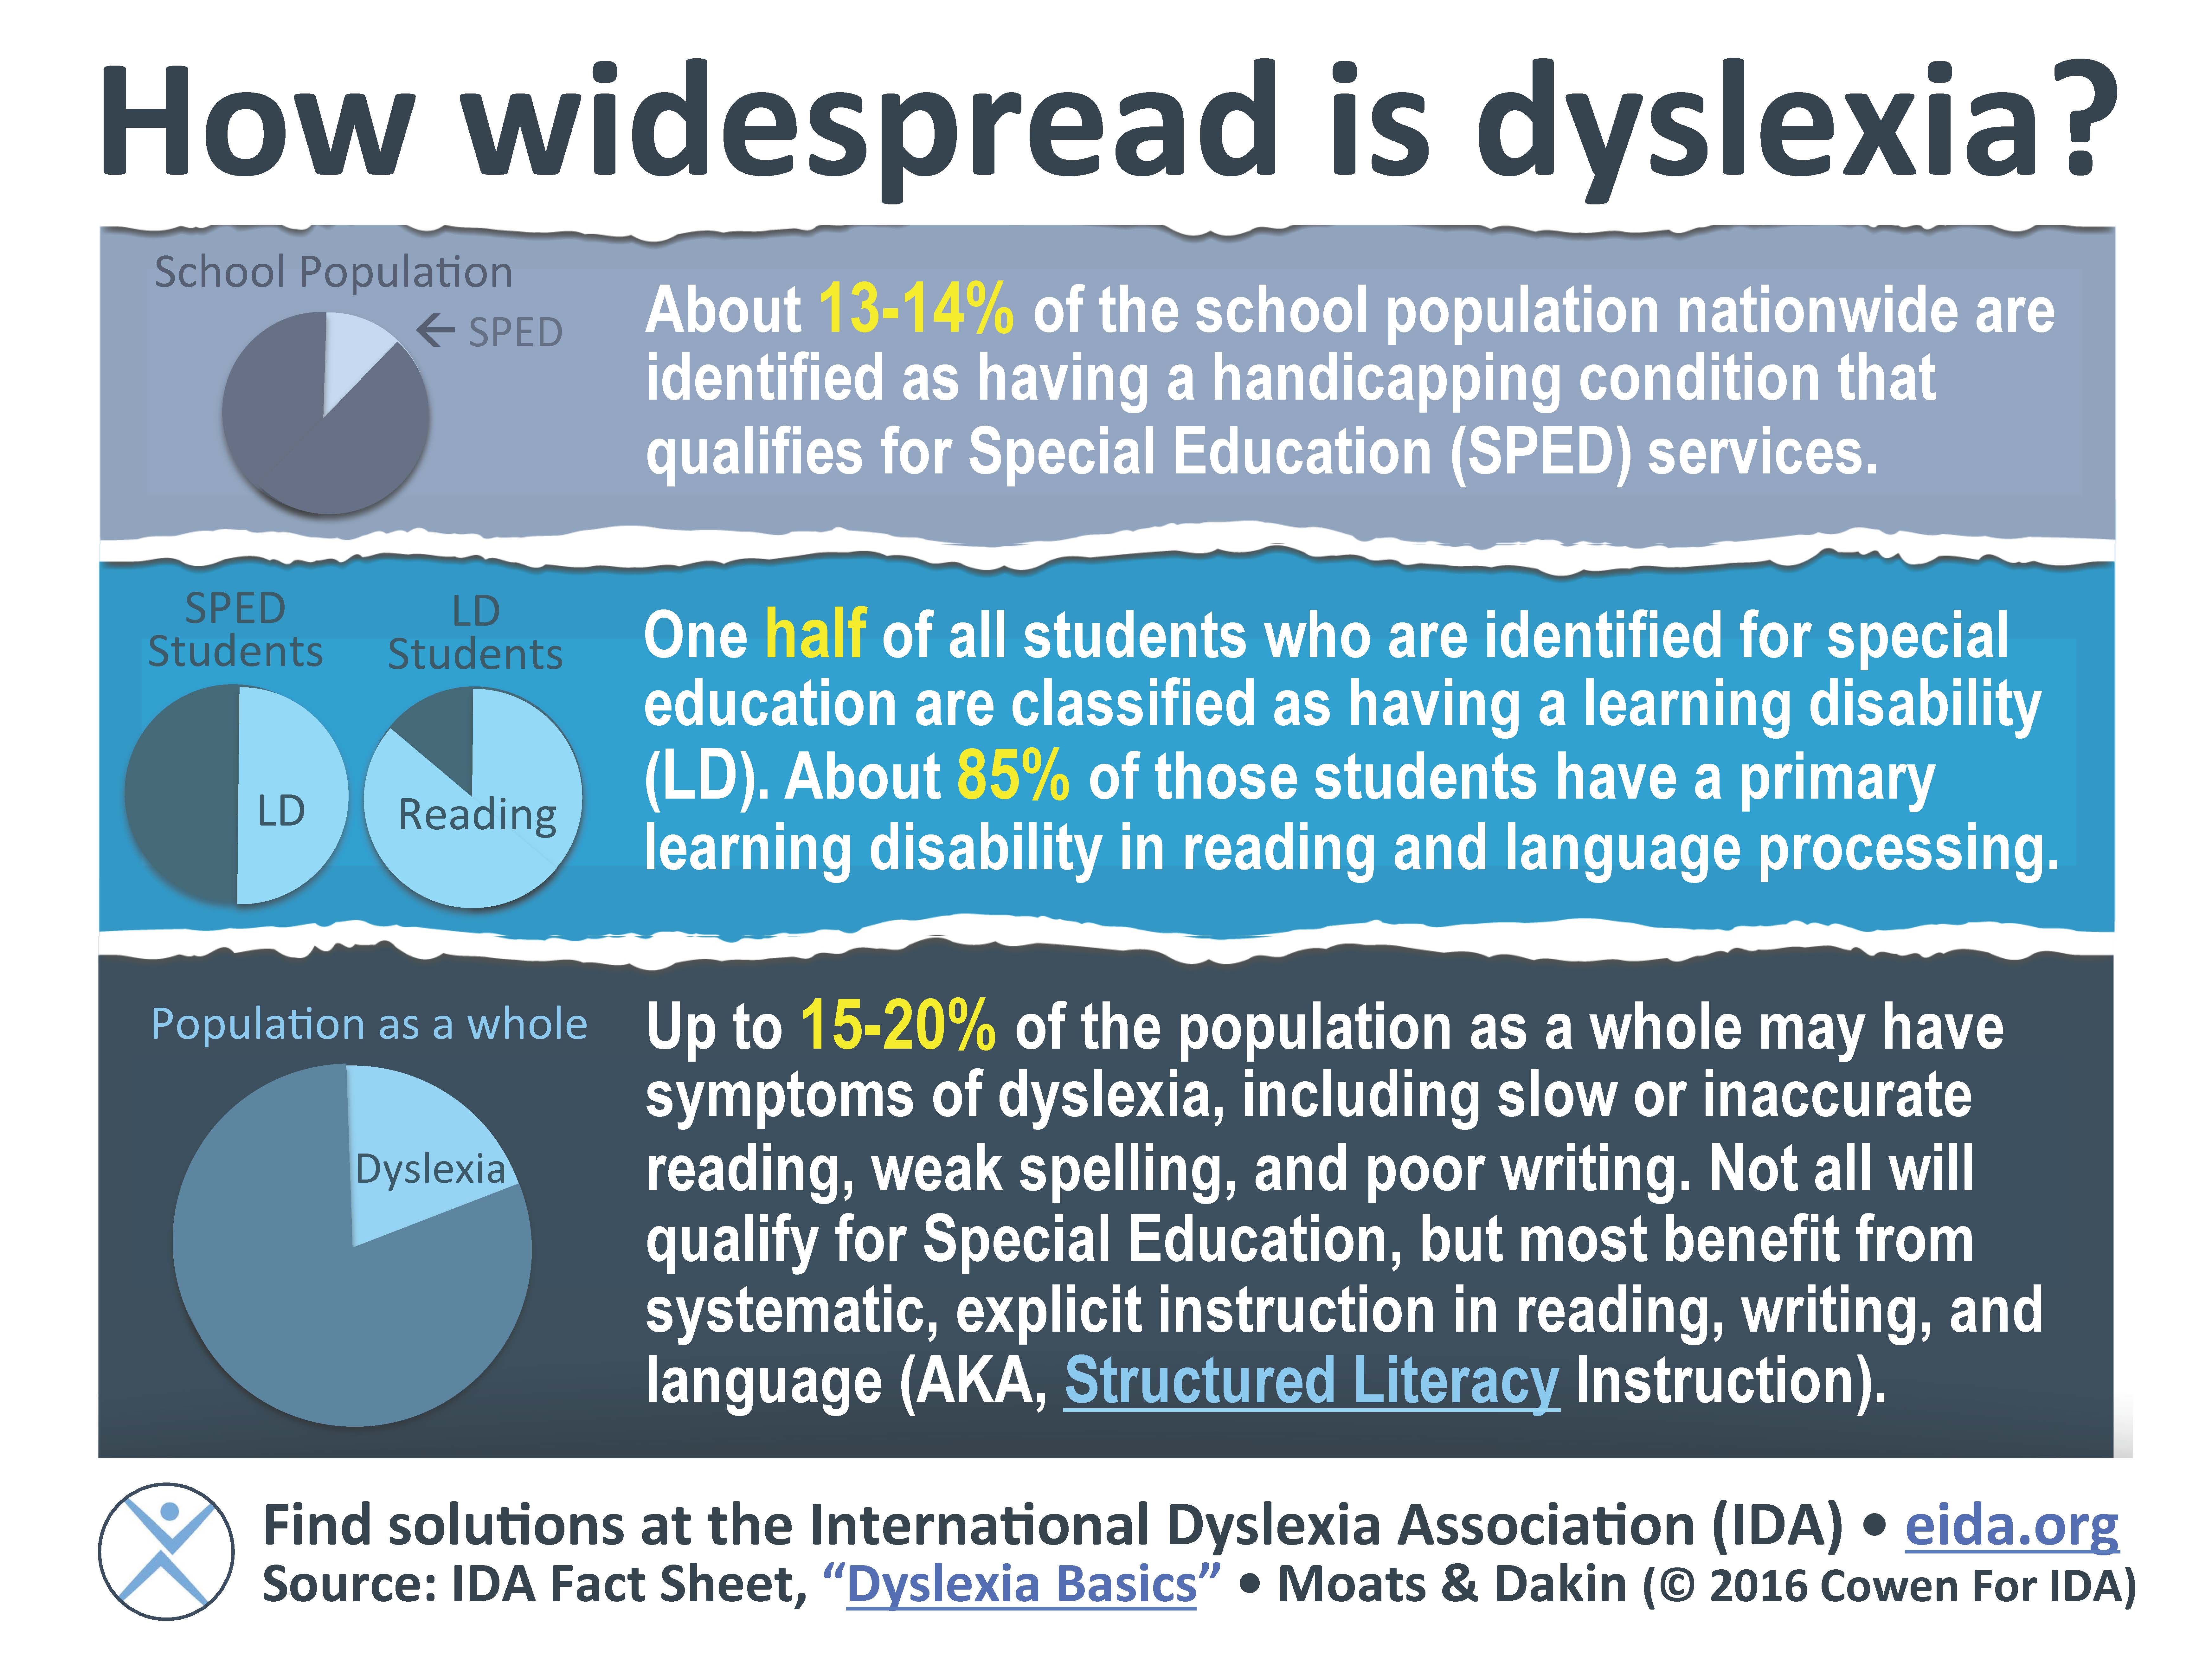 How Widespread is Dyslexia? Infographic